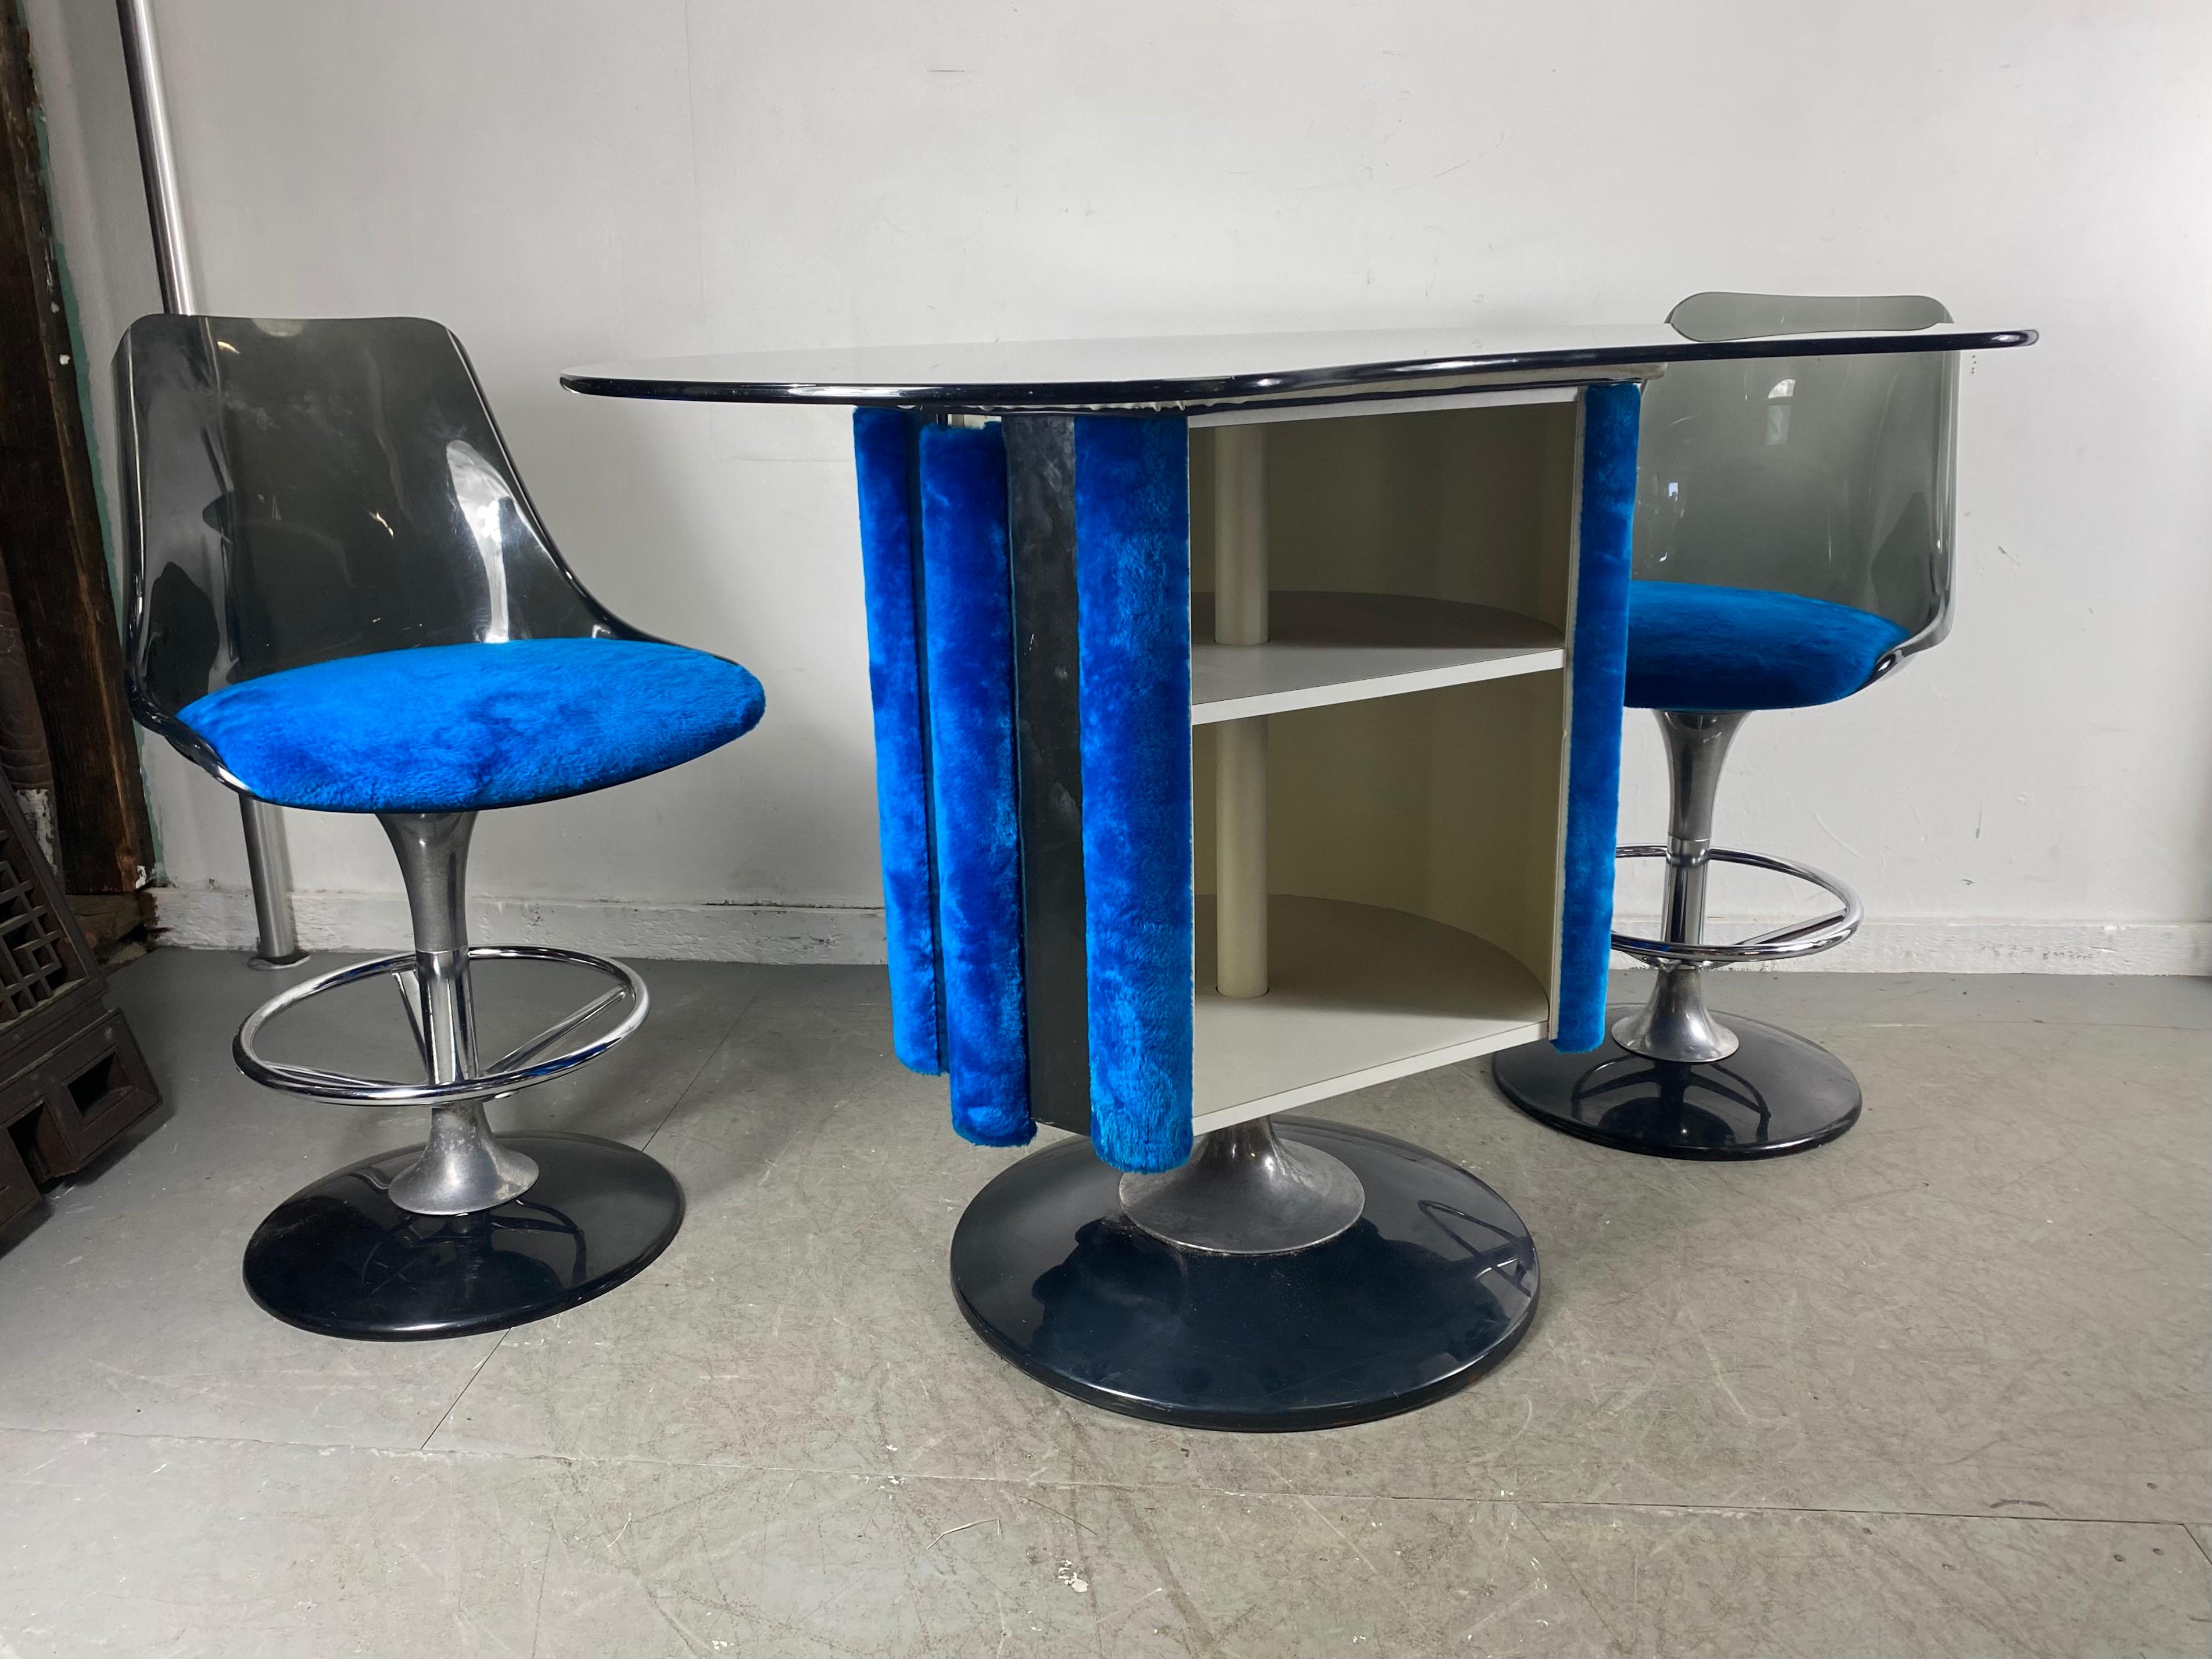 1970s Space Age Three-Piece Pedestal Dry Bar with Two Stools by Chrome Craft 4